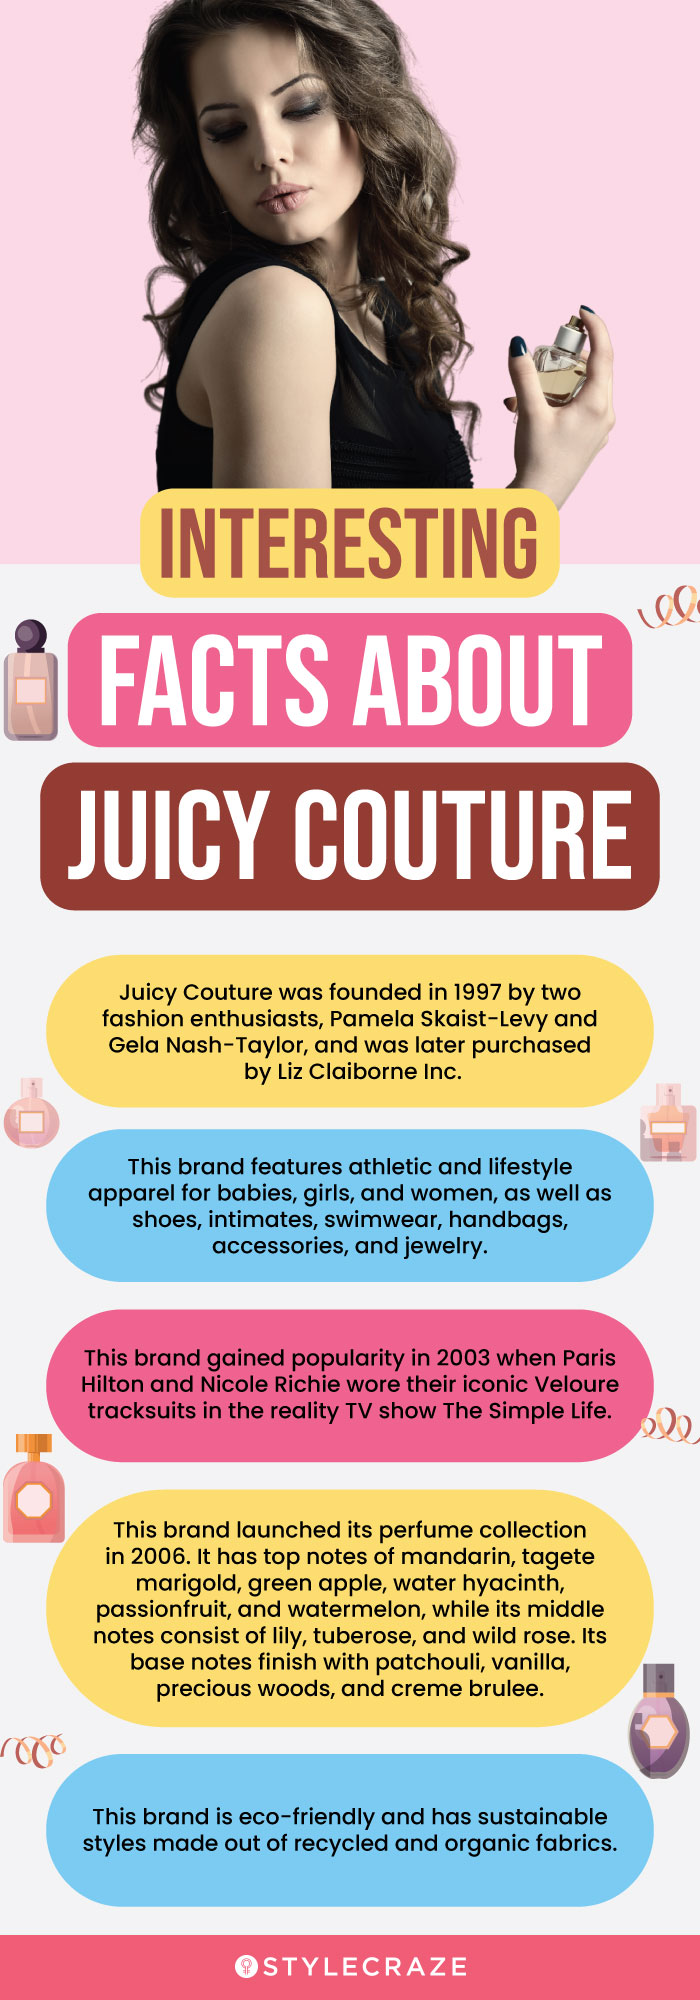 Interesting Facts About Juicy Couture (infographic)